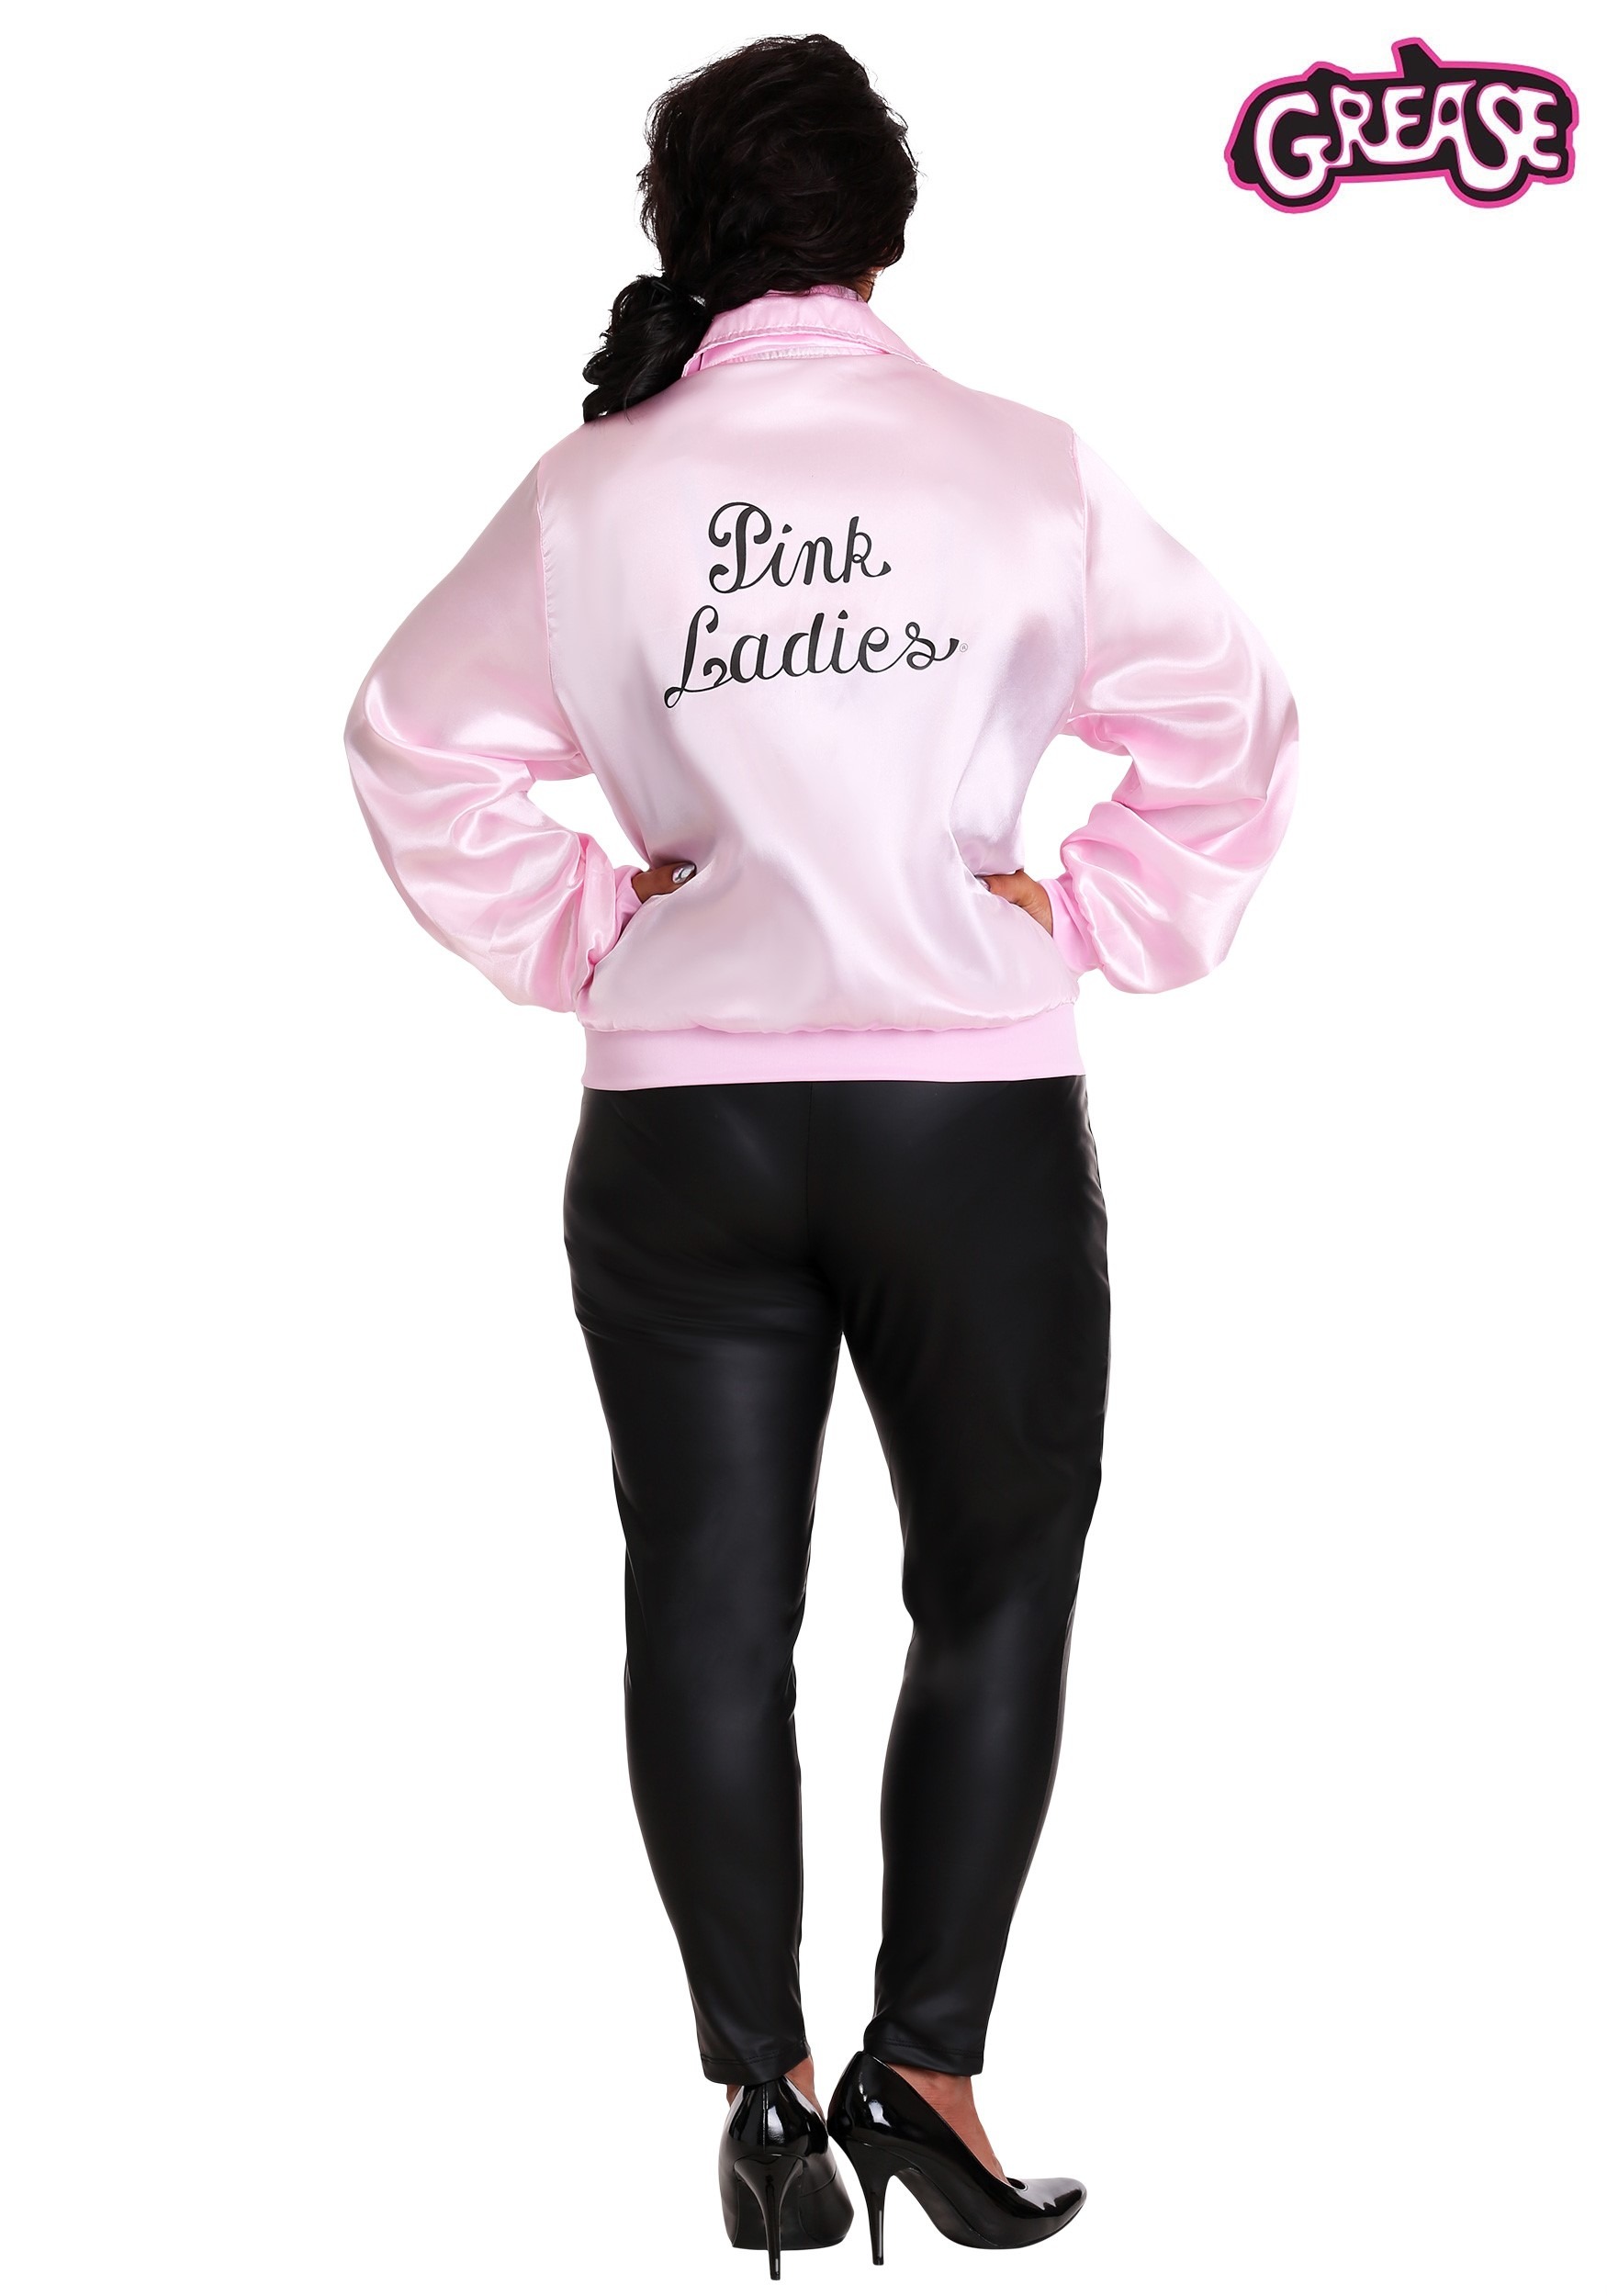 Plus Size Grease Pink Costume | Musical Costume